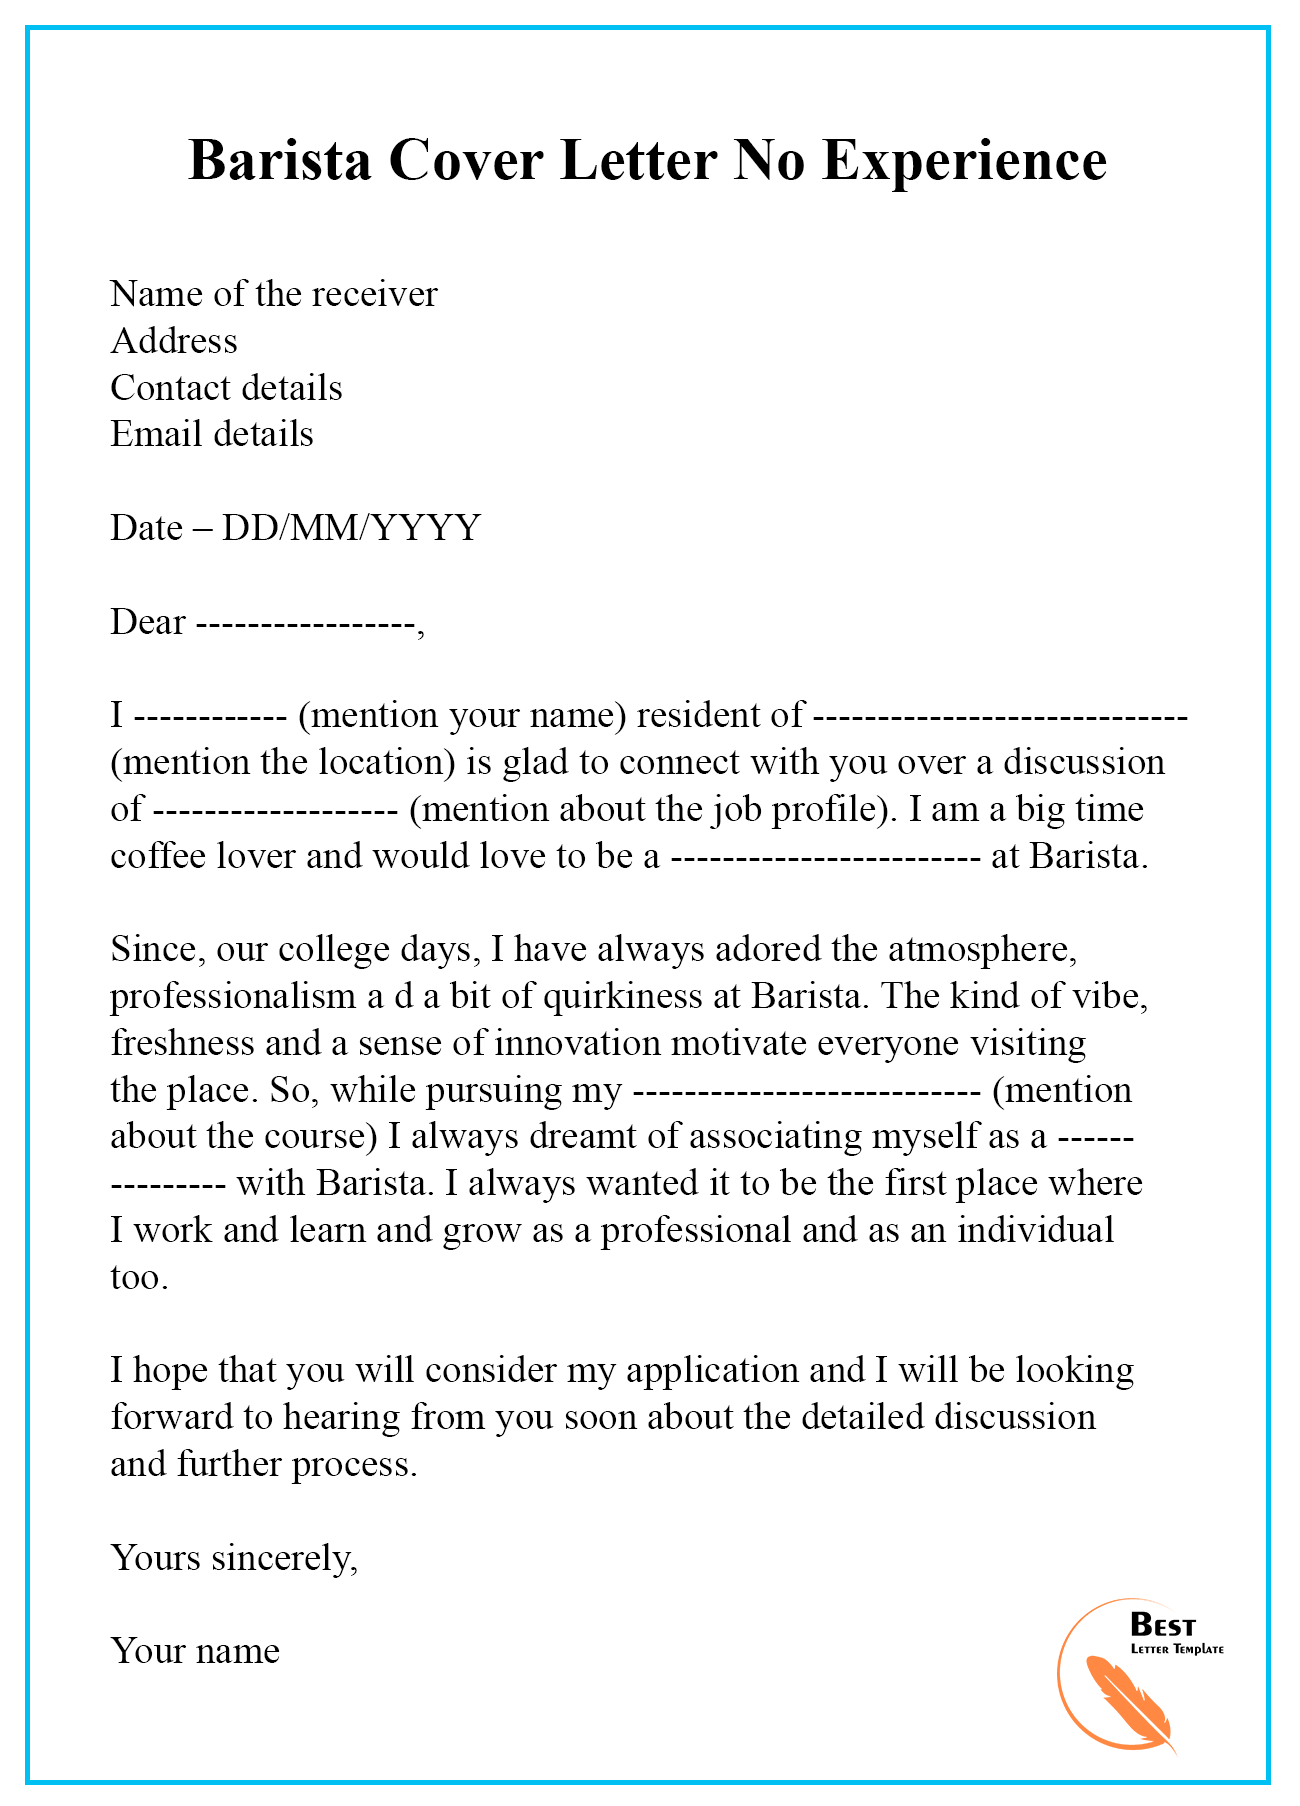 Barista-Cover-Letter-No-Experience - Best Letter Template